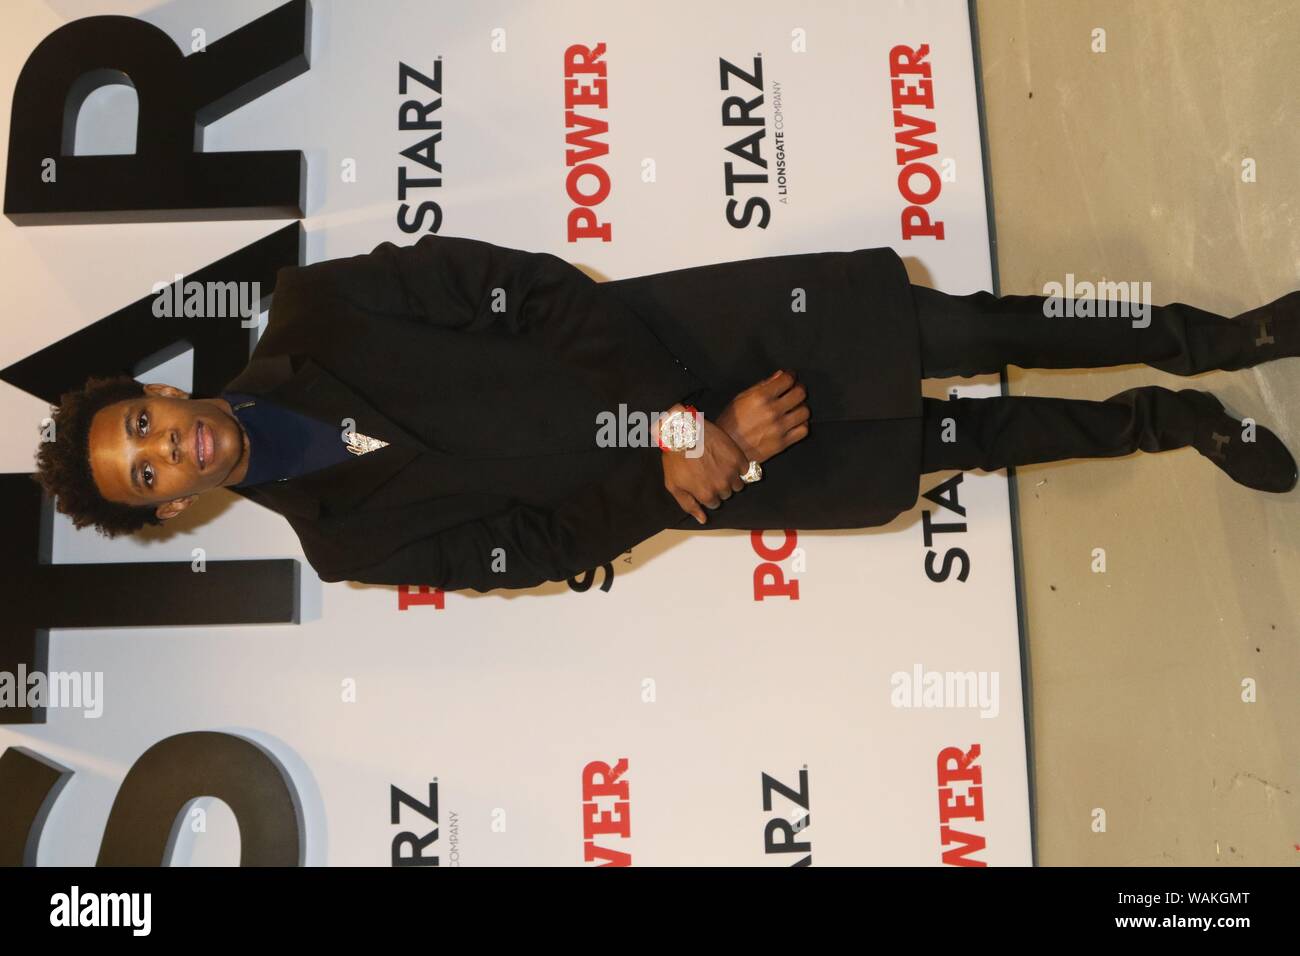 New York, NY, USA. 20th Aug, 2019. A Boogie Wit The Hoodie backstage at the Power Season 6 Premiere August 20, 2019 at Madison Square Garden in New York City. Photo Credit: Walik Goshorn/Mediapunch/Alamy Live News Stock Photo